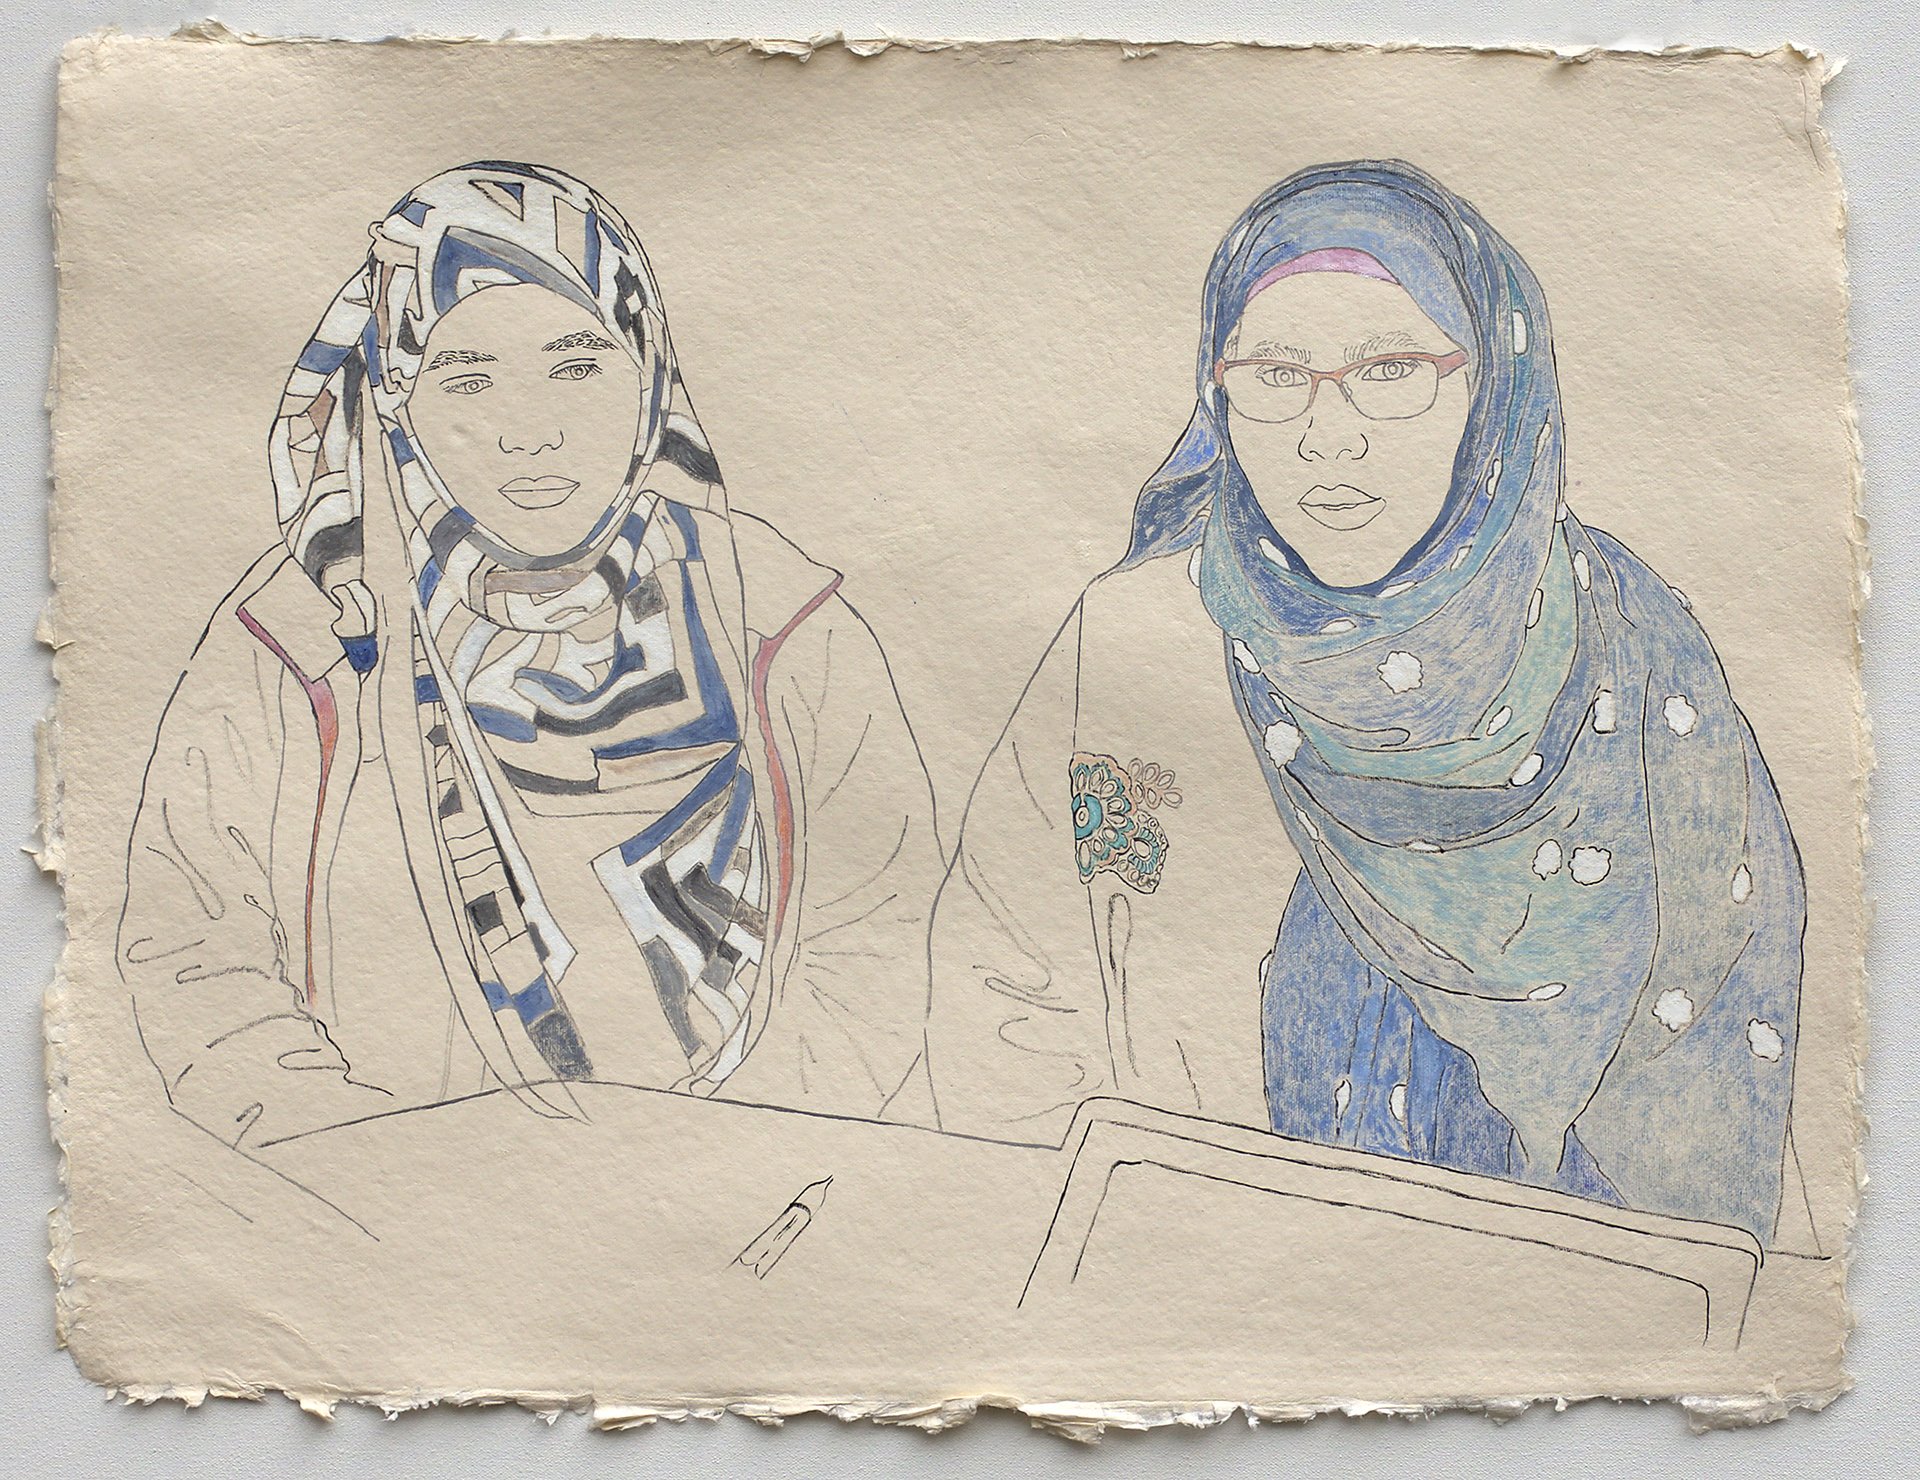   Mother and Daughter, Applying for United States Citizenship (Version II)   2019, ink, watercolor, gouache on handmade paper made in India from recycled clothing, 19” x 25”  In the collection of the Blanden Memorial Art Museum, IA 